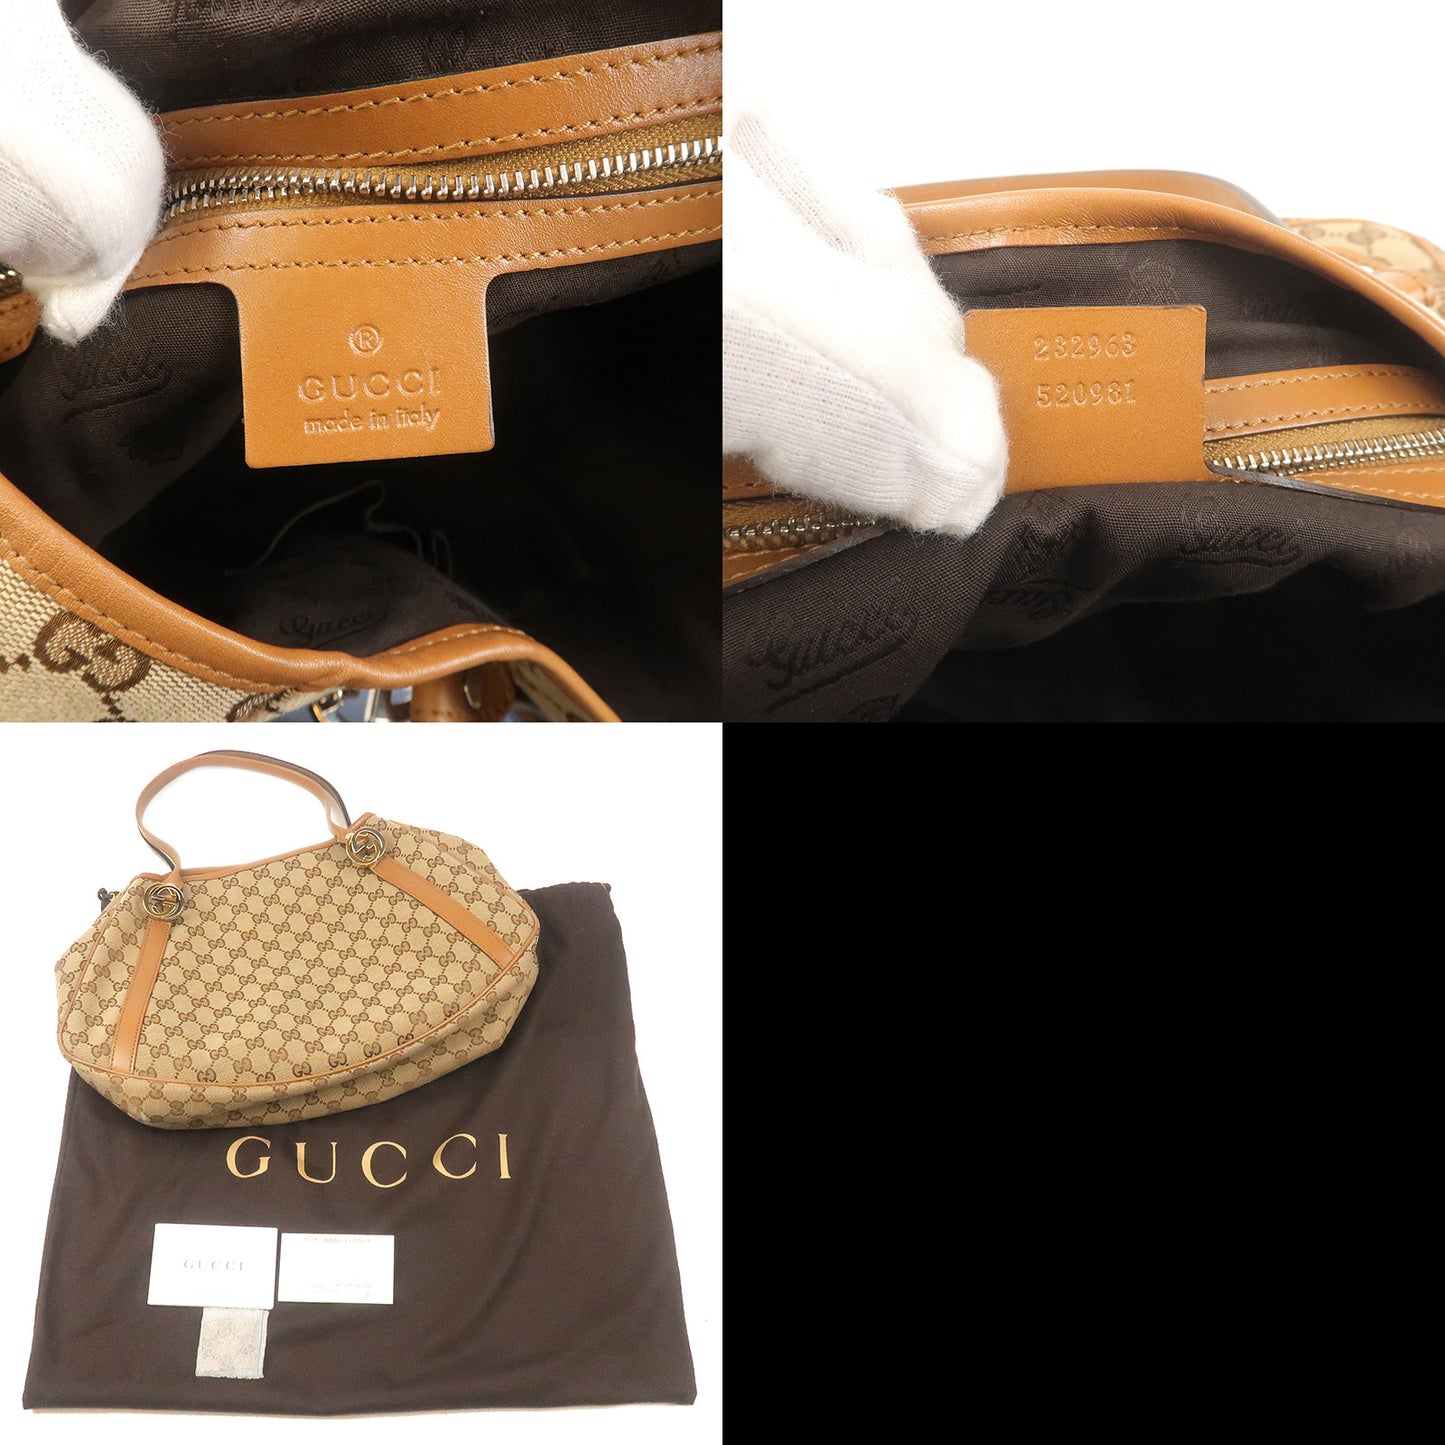 GUCCI Twins GG Canvas Leather Tote Bag Beige 232963 F/S